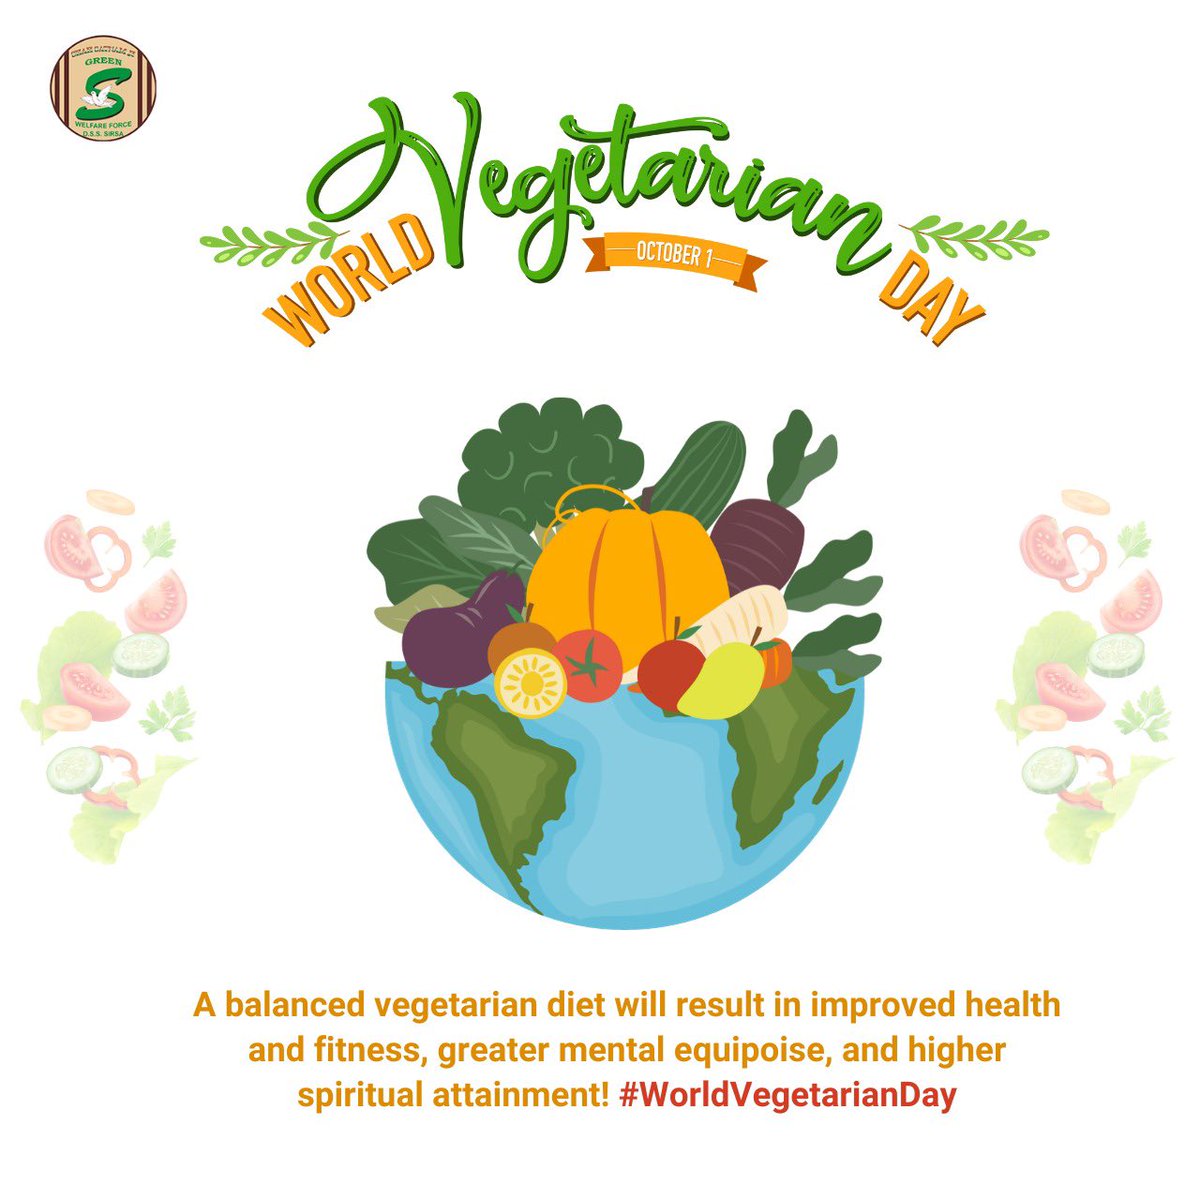 A journey towards wellness and harmony begins with respect & empathy for all. This #WorldVegetarianDay, celebrate the power of plates towards a greener & humane world. With plant-based food we choose compassion with each bite, reduce our ecological footprint & promote better